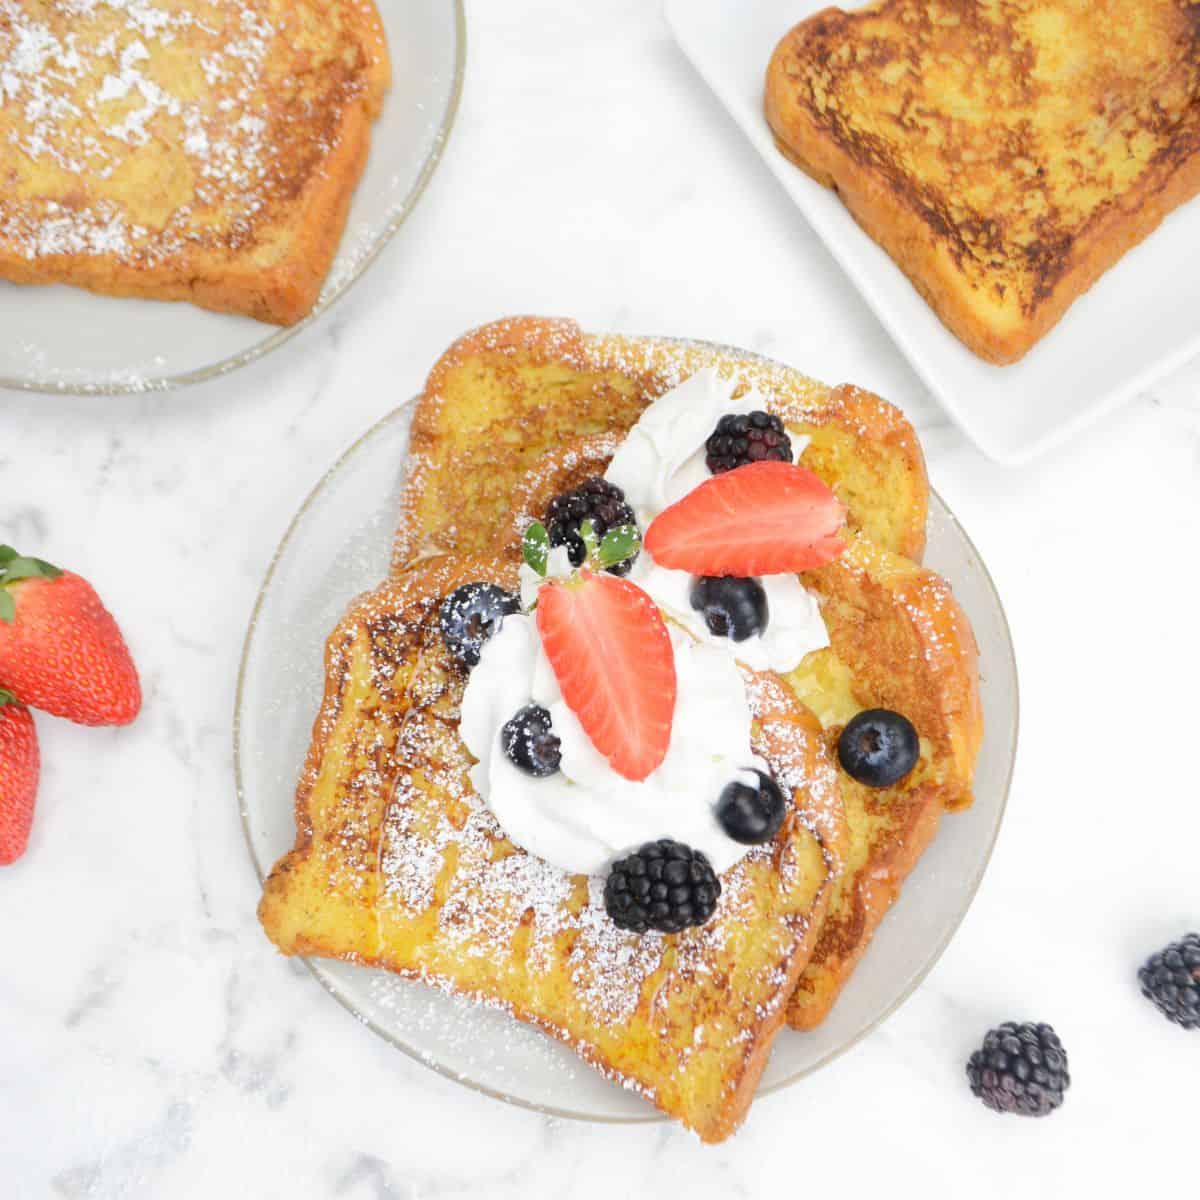 Three slices of Blackstone French toast sit on a plate topped with whipped cream, powdered sugar, berries and honey. Two plates of untopped French toast are placed to the side.